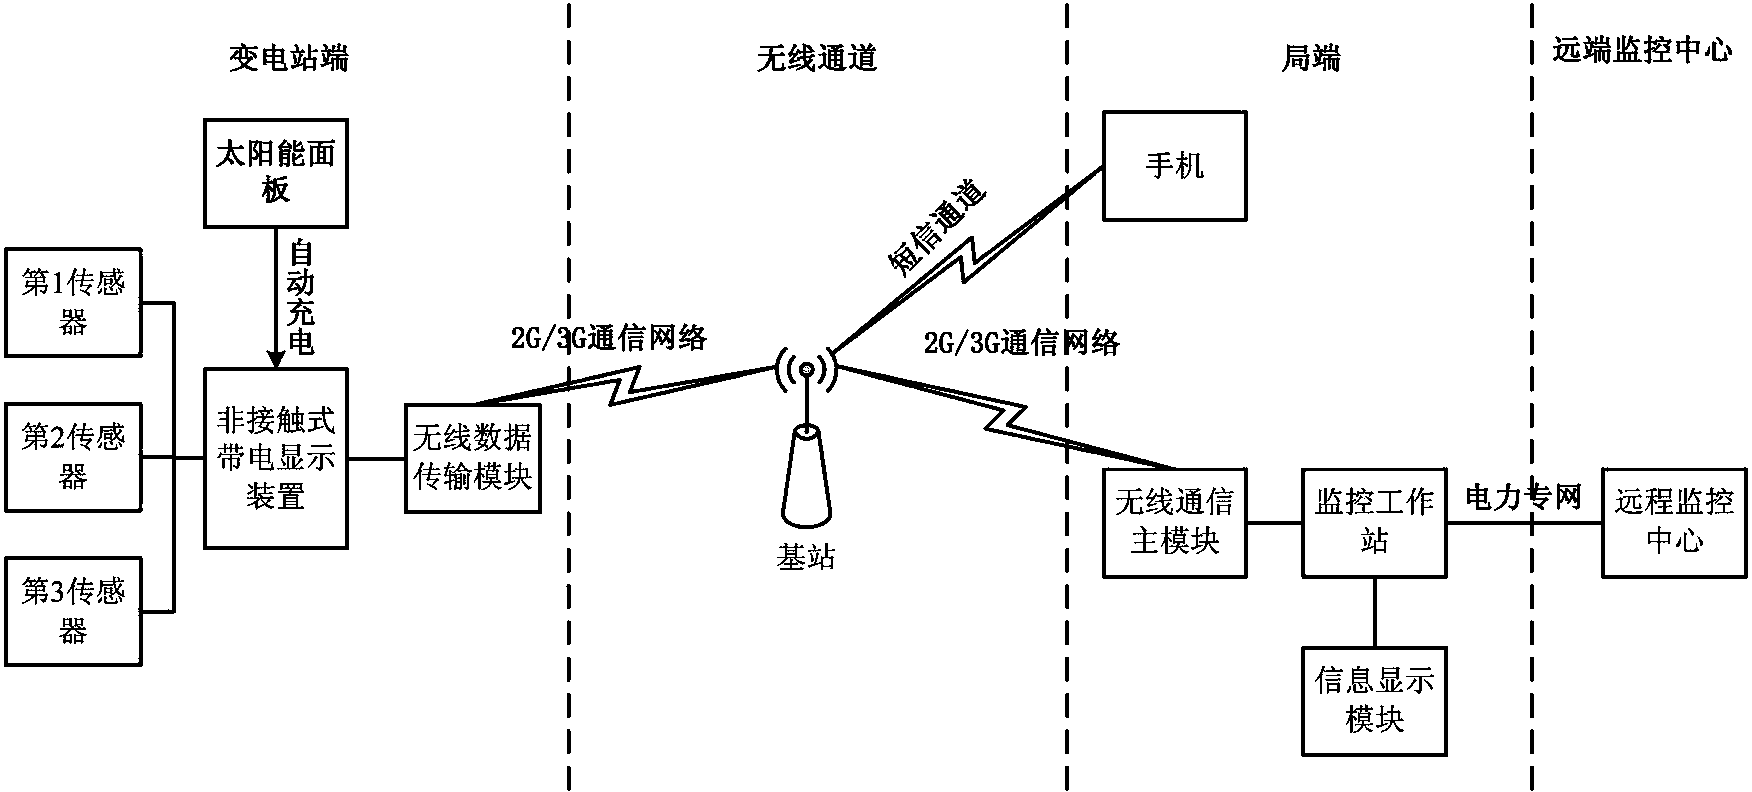 On-line teletransmission display and alarm device for power operation equipment